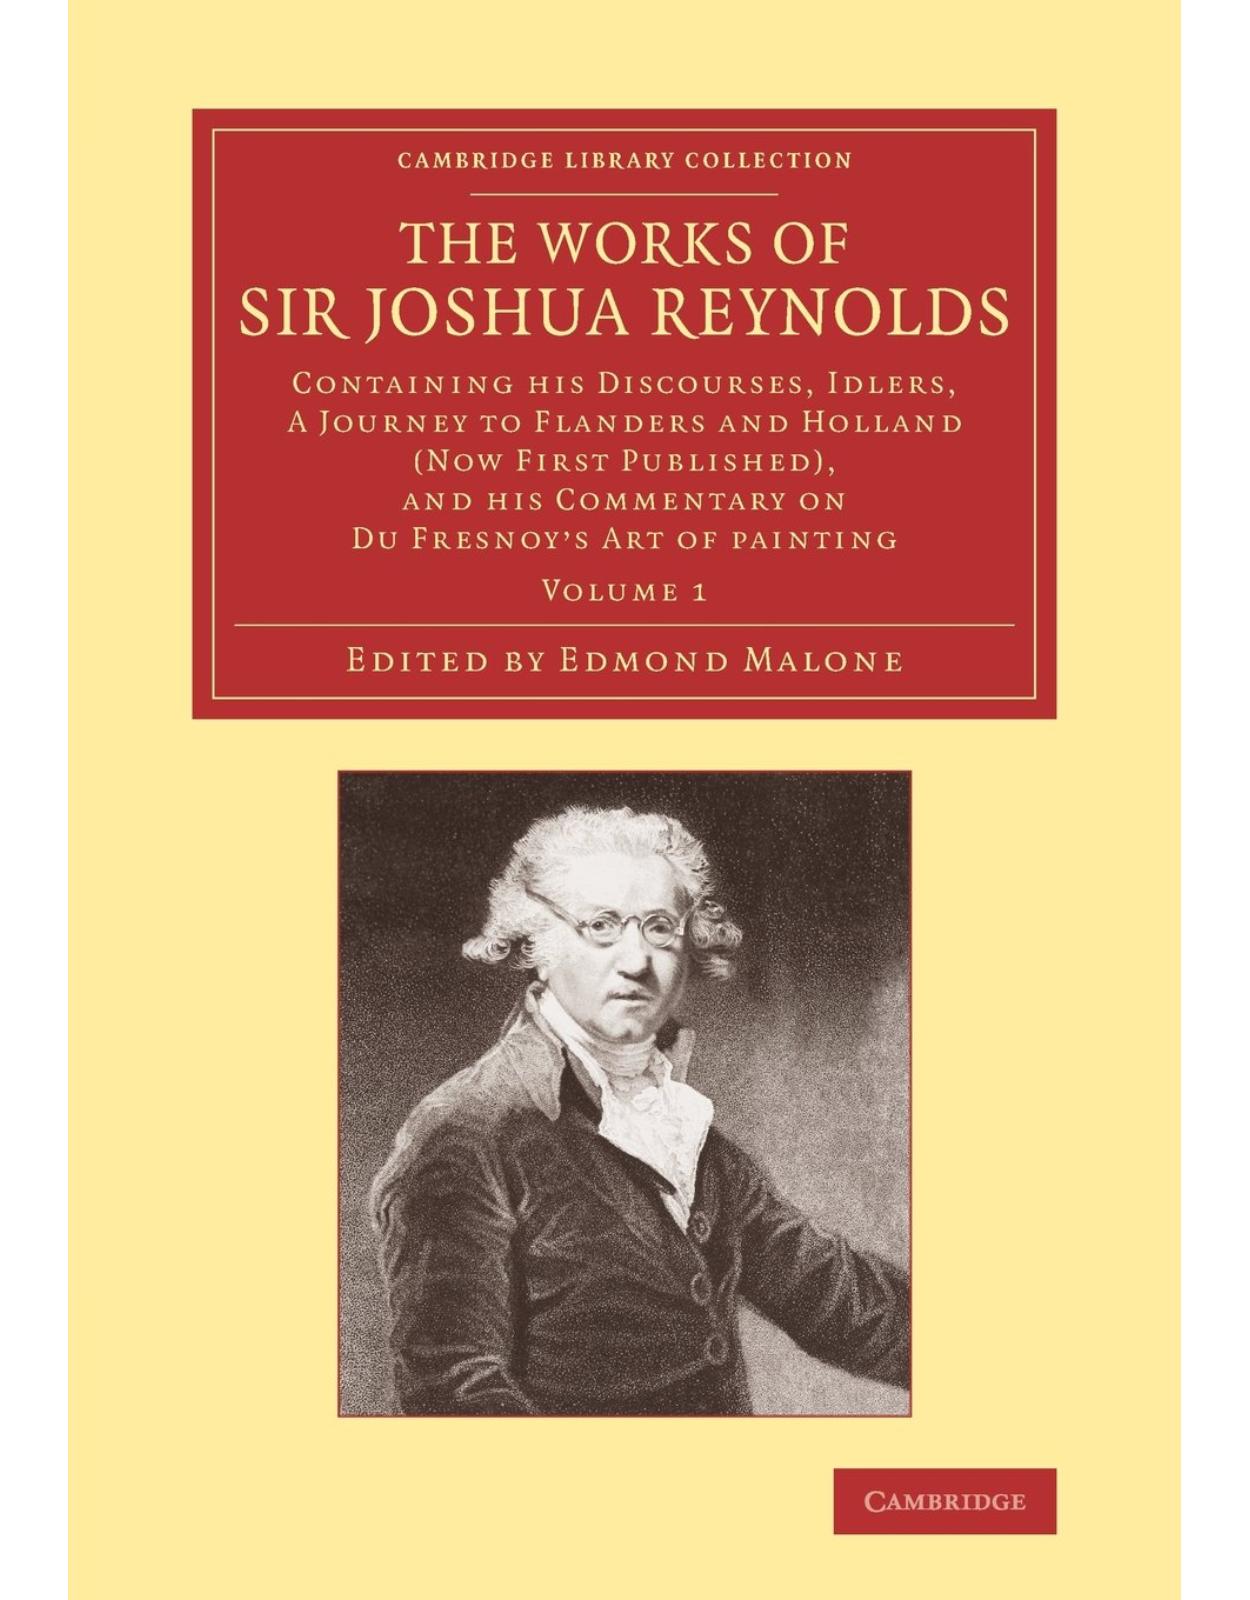 The Works of Sir Joshua Reynolds: Volume 1: Containing his  Discourses, Idlers, A Journey to Flanders and Holland  (Now First Published), and his Commentary on Du Fresnoy's 'Art of Painting'